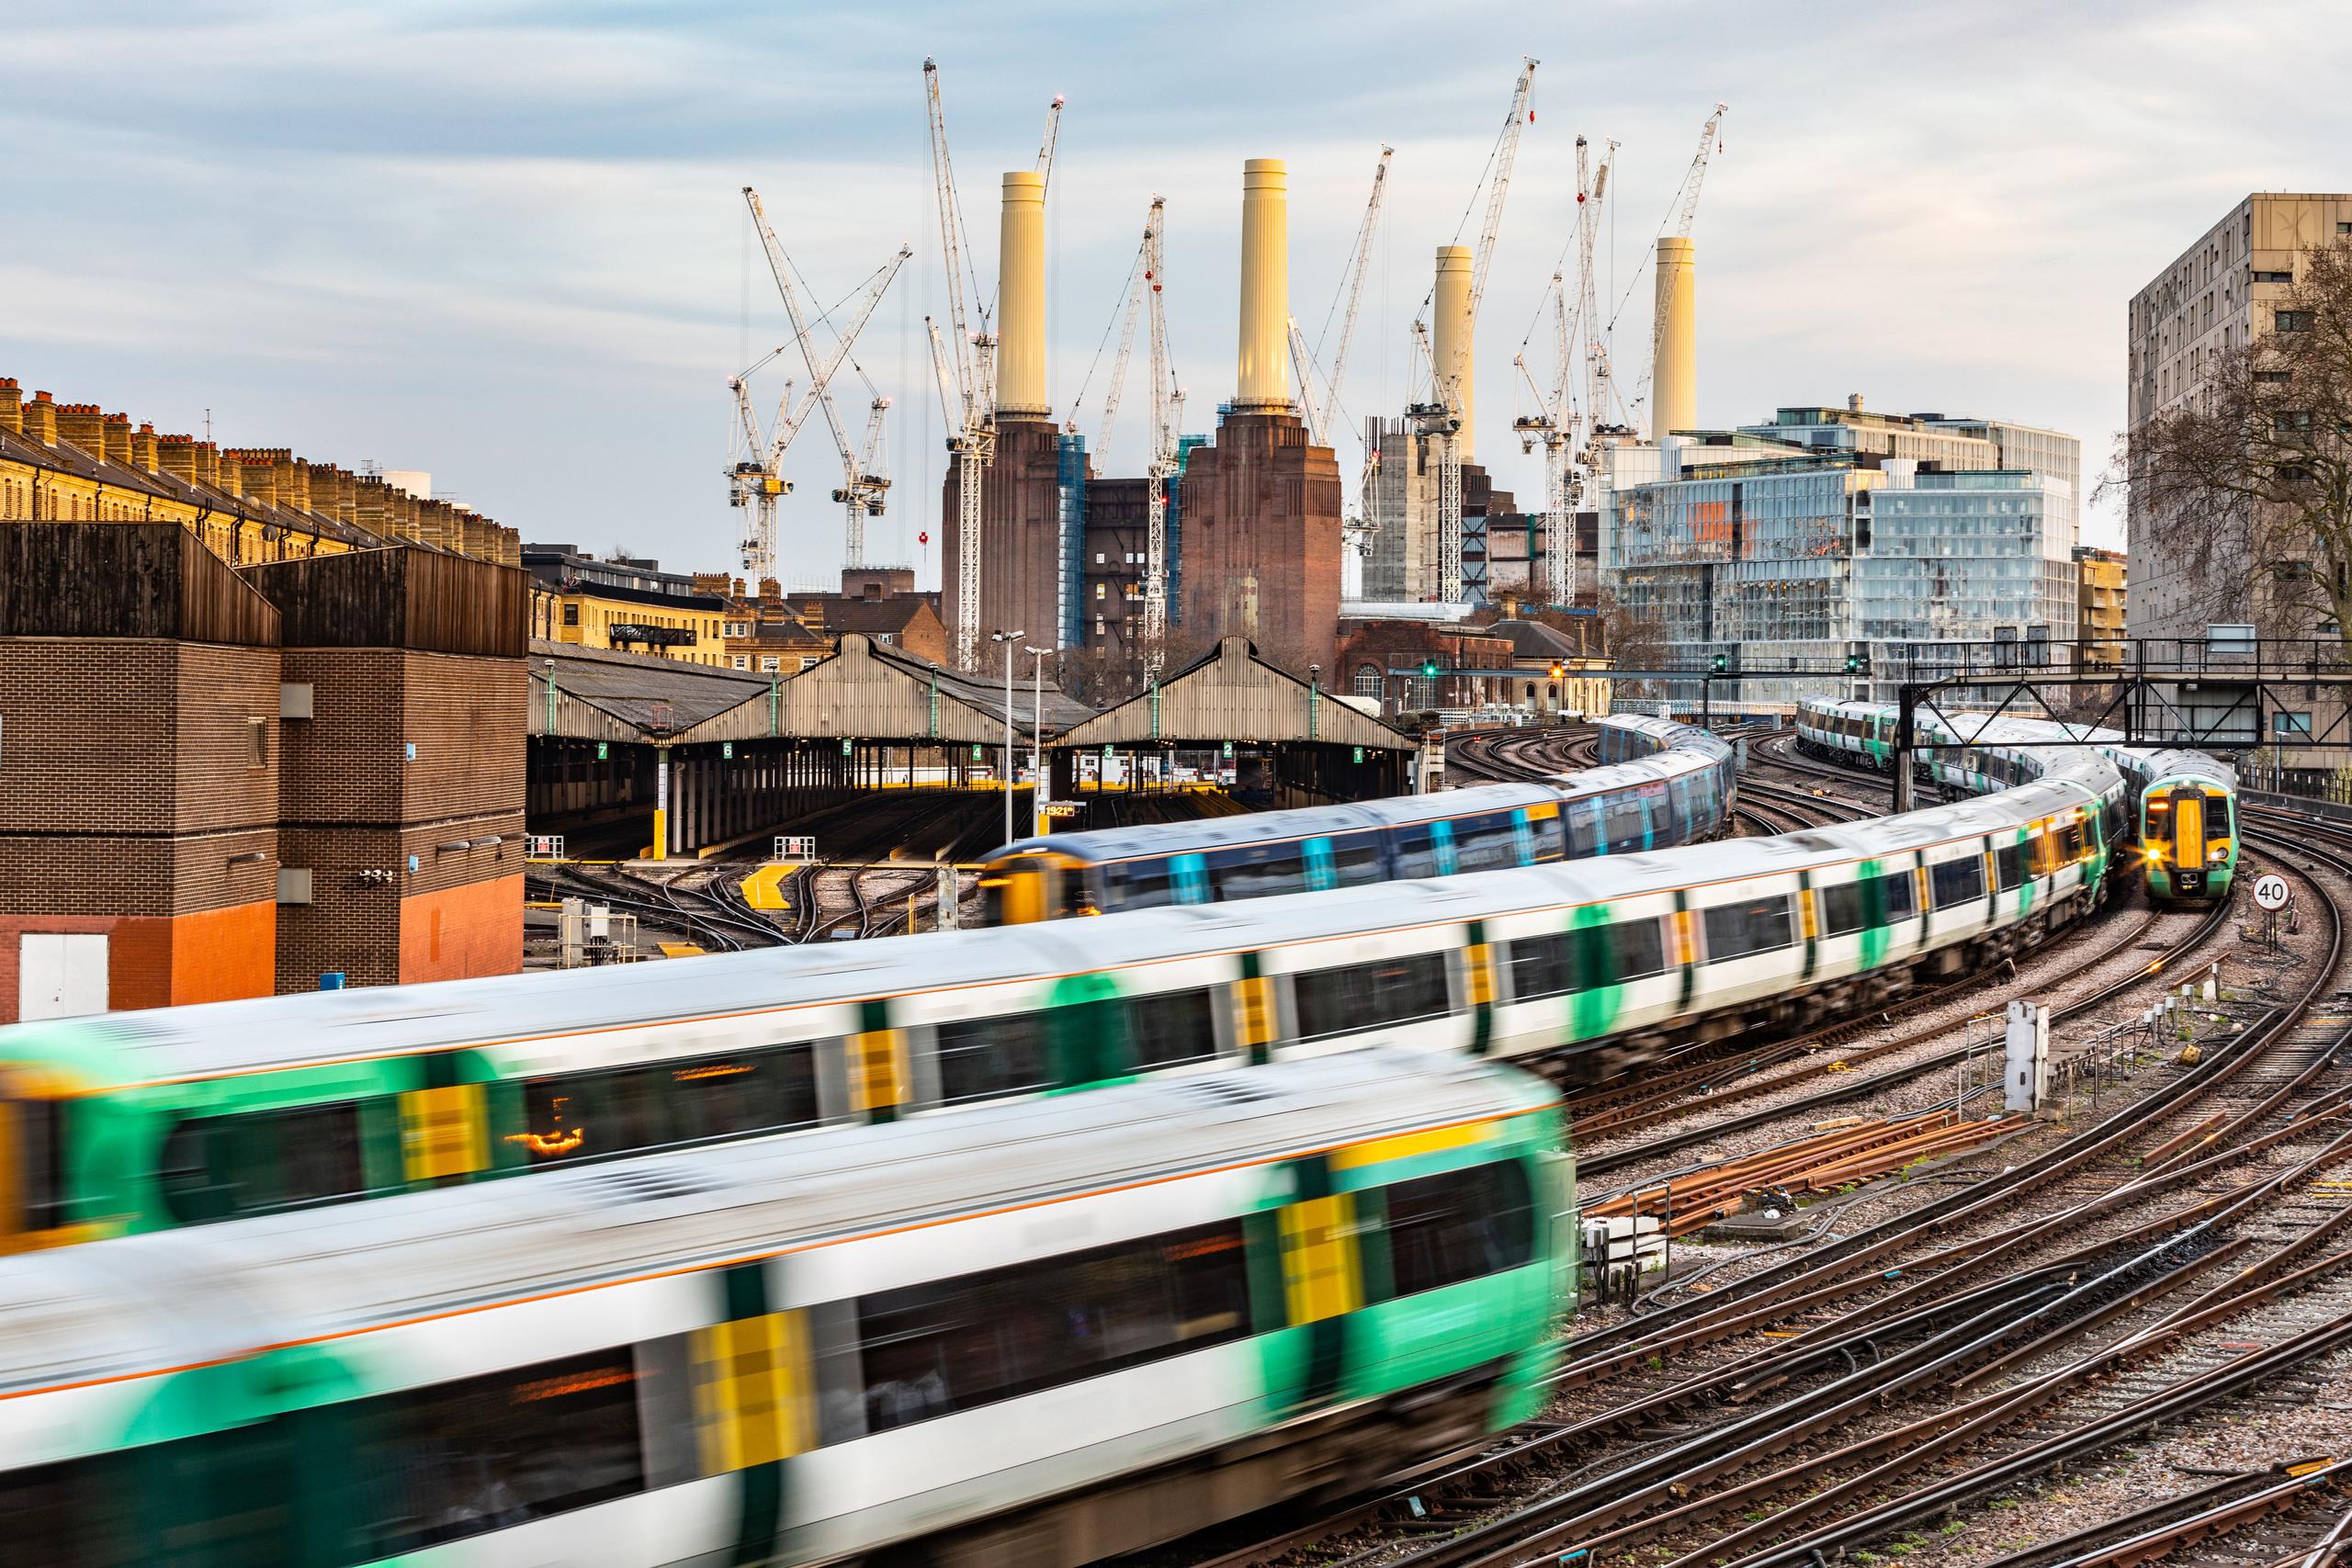 Trains travelling on tracks in front of Battersea power station